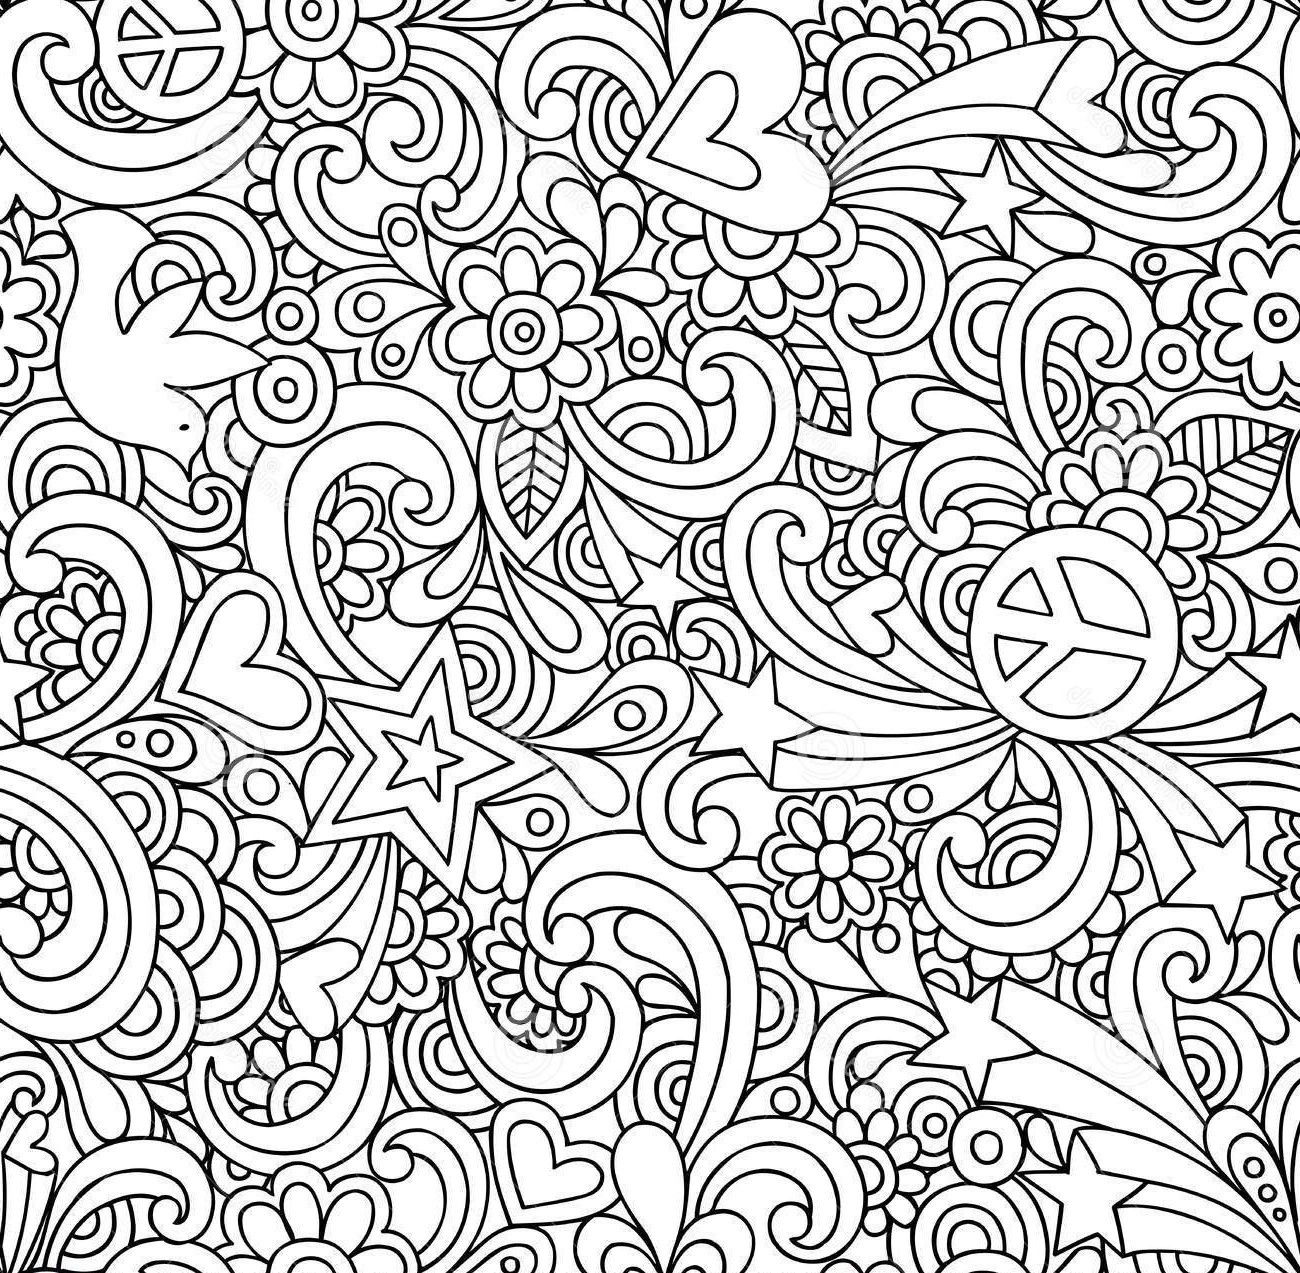 abstract-coloring-pages-for-adults-to-print-3.jpg